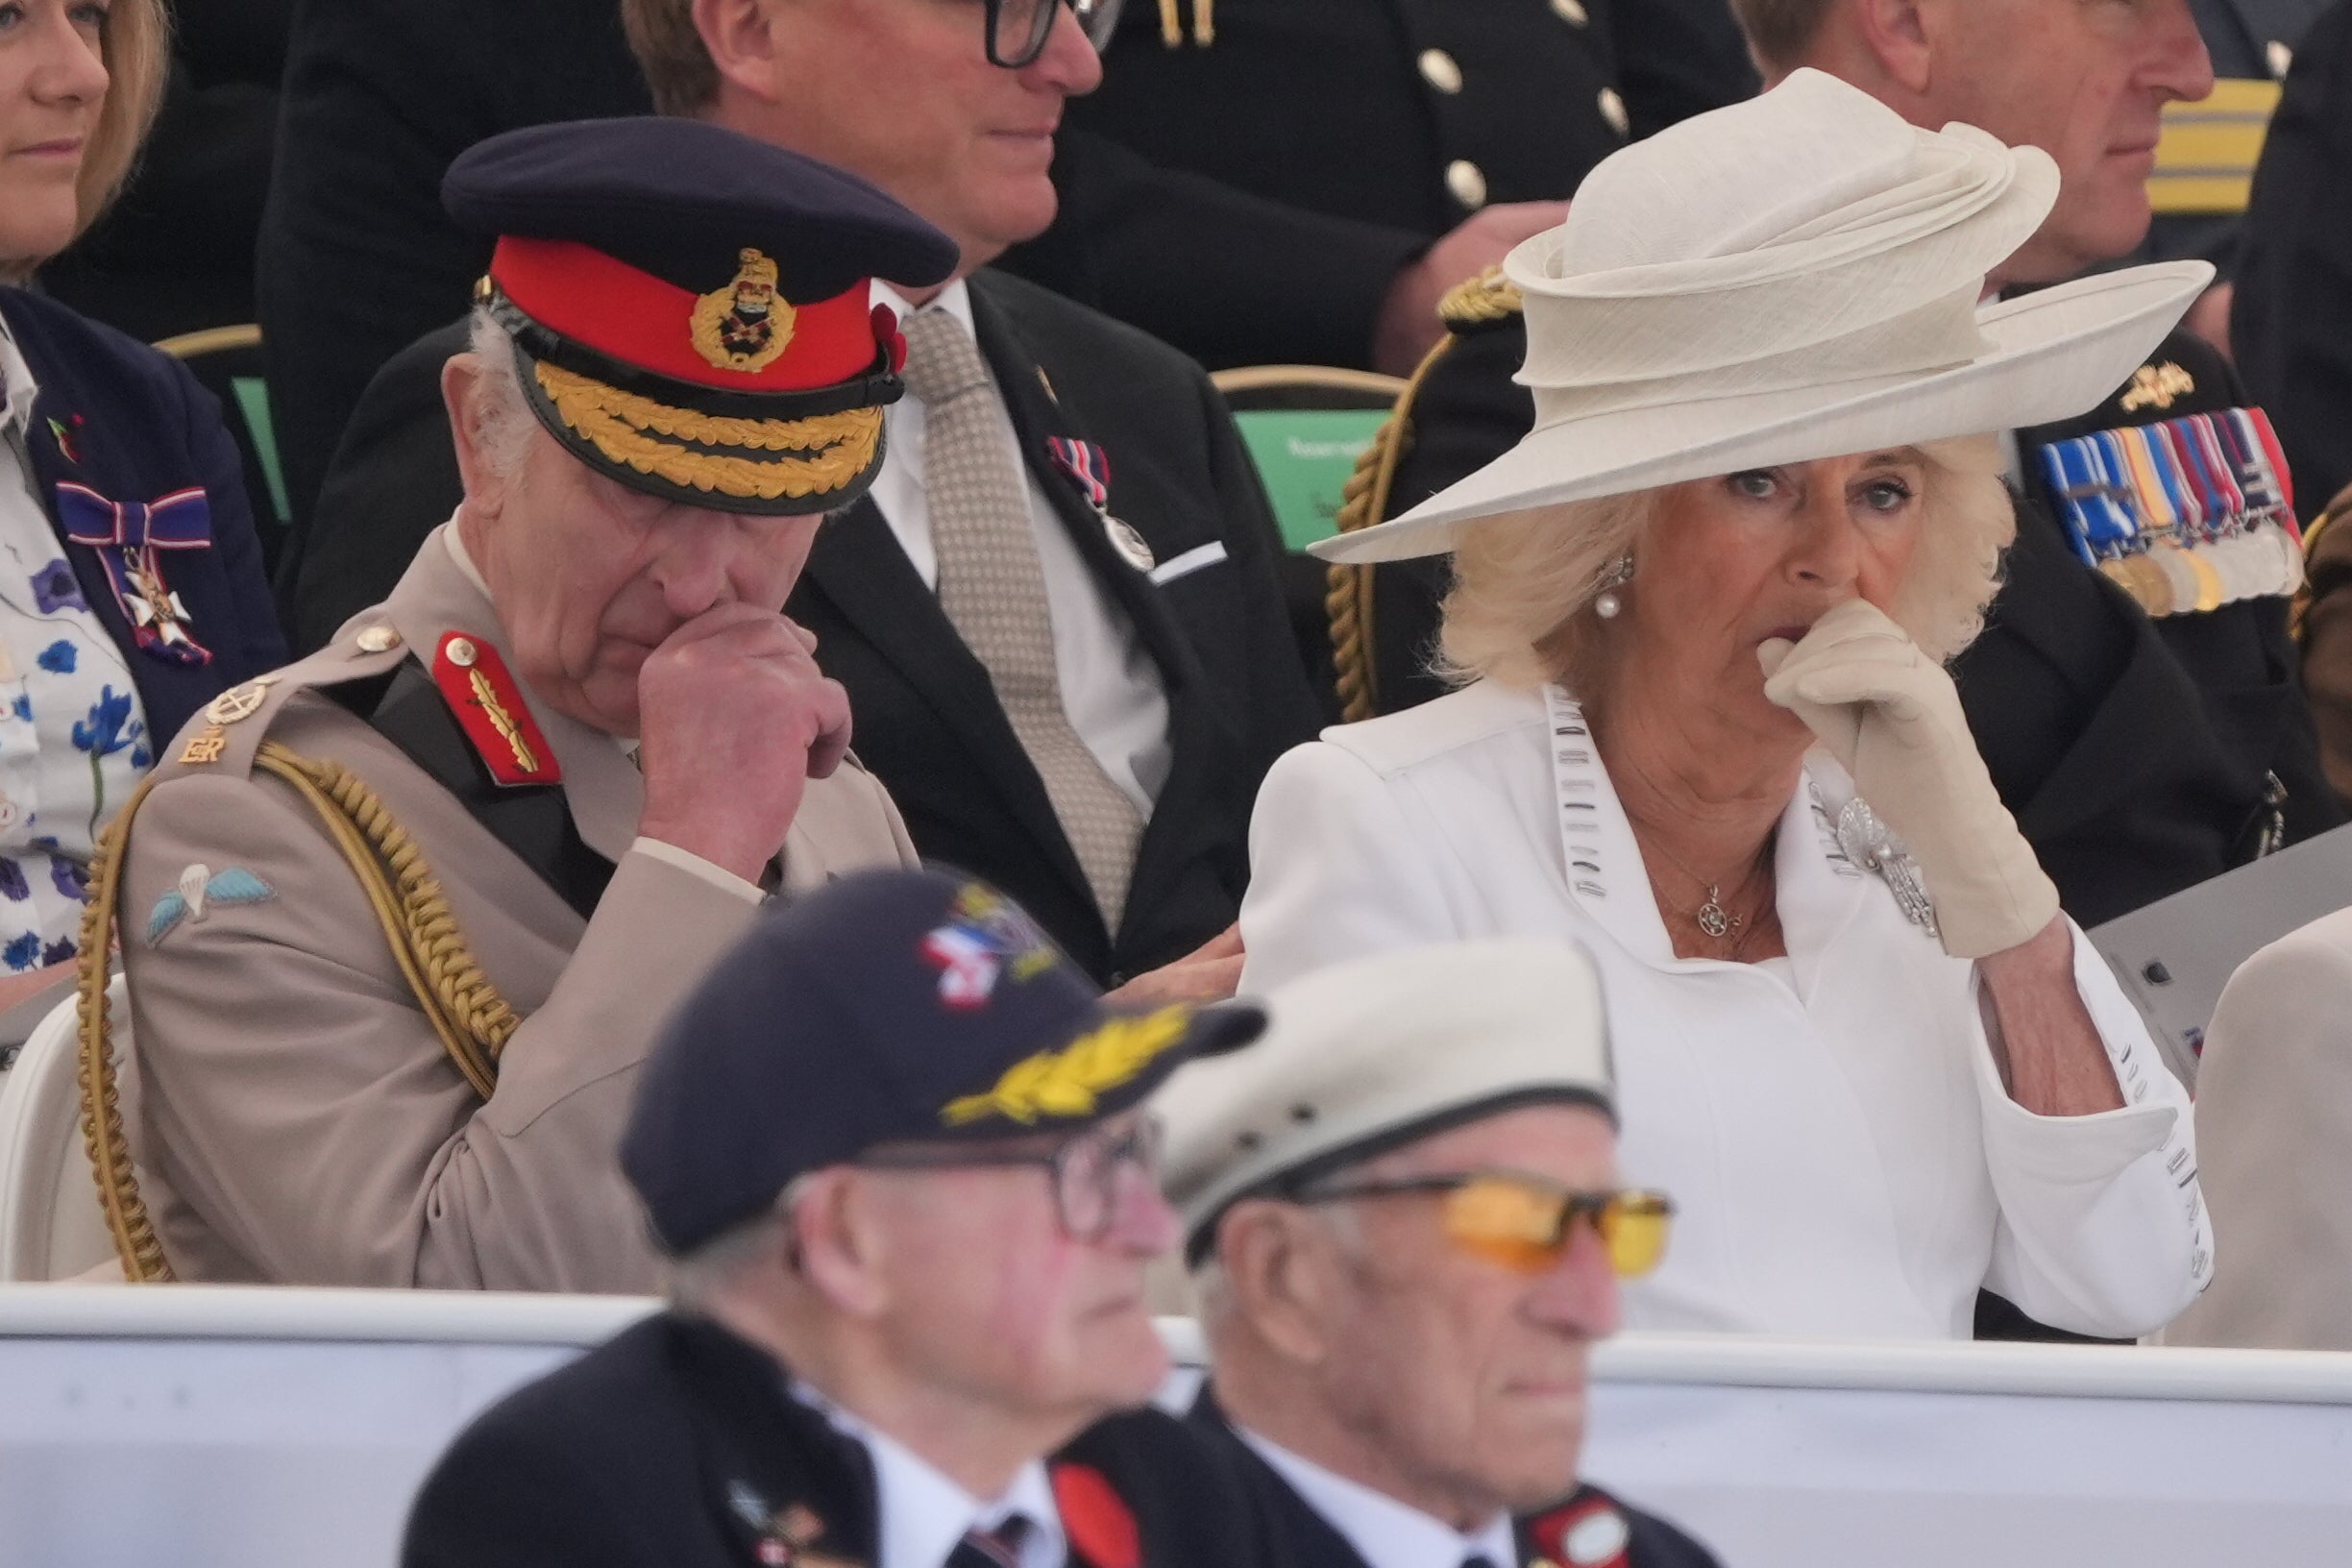 The King and Queen appear emotional during the UK national commemorative event for the 80th anniversary of D-Day in Ver-sur-Mer, Normandy, France (Gareth Fuller/PA)